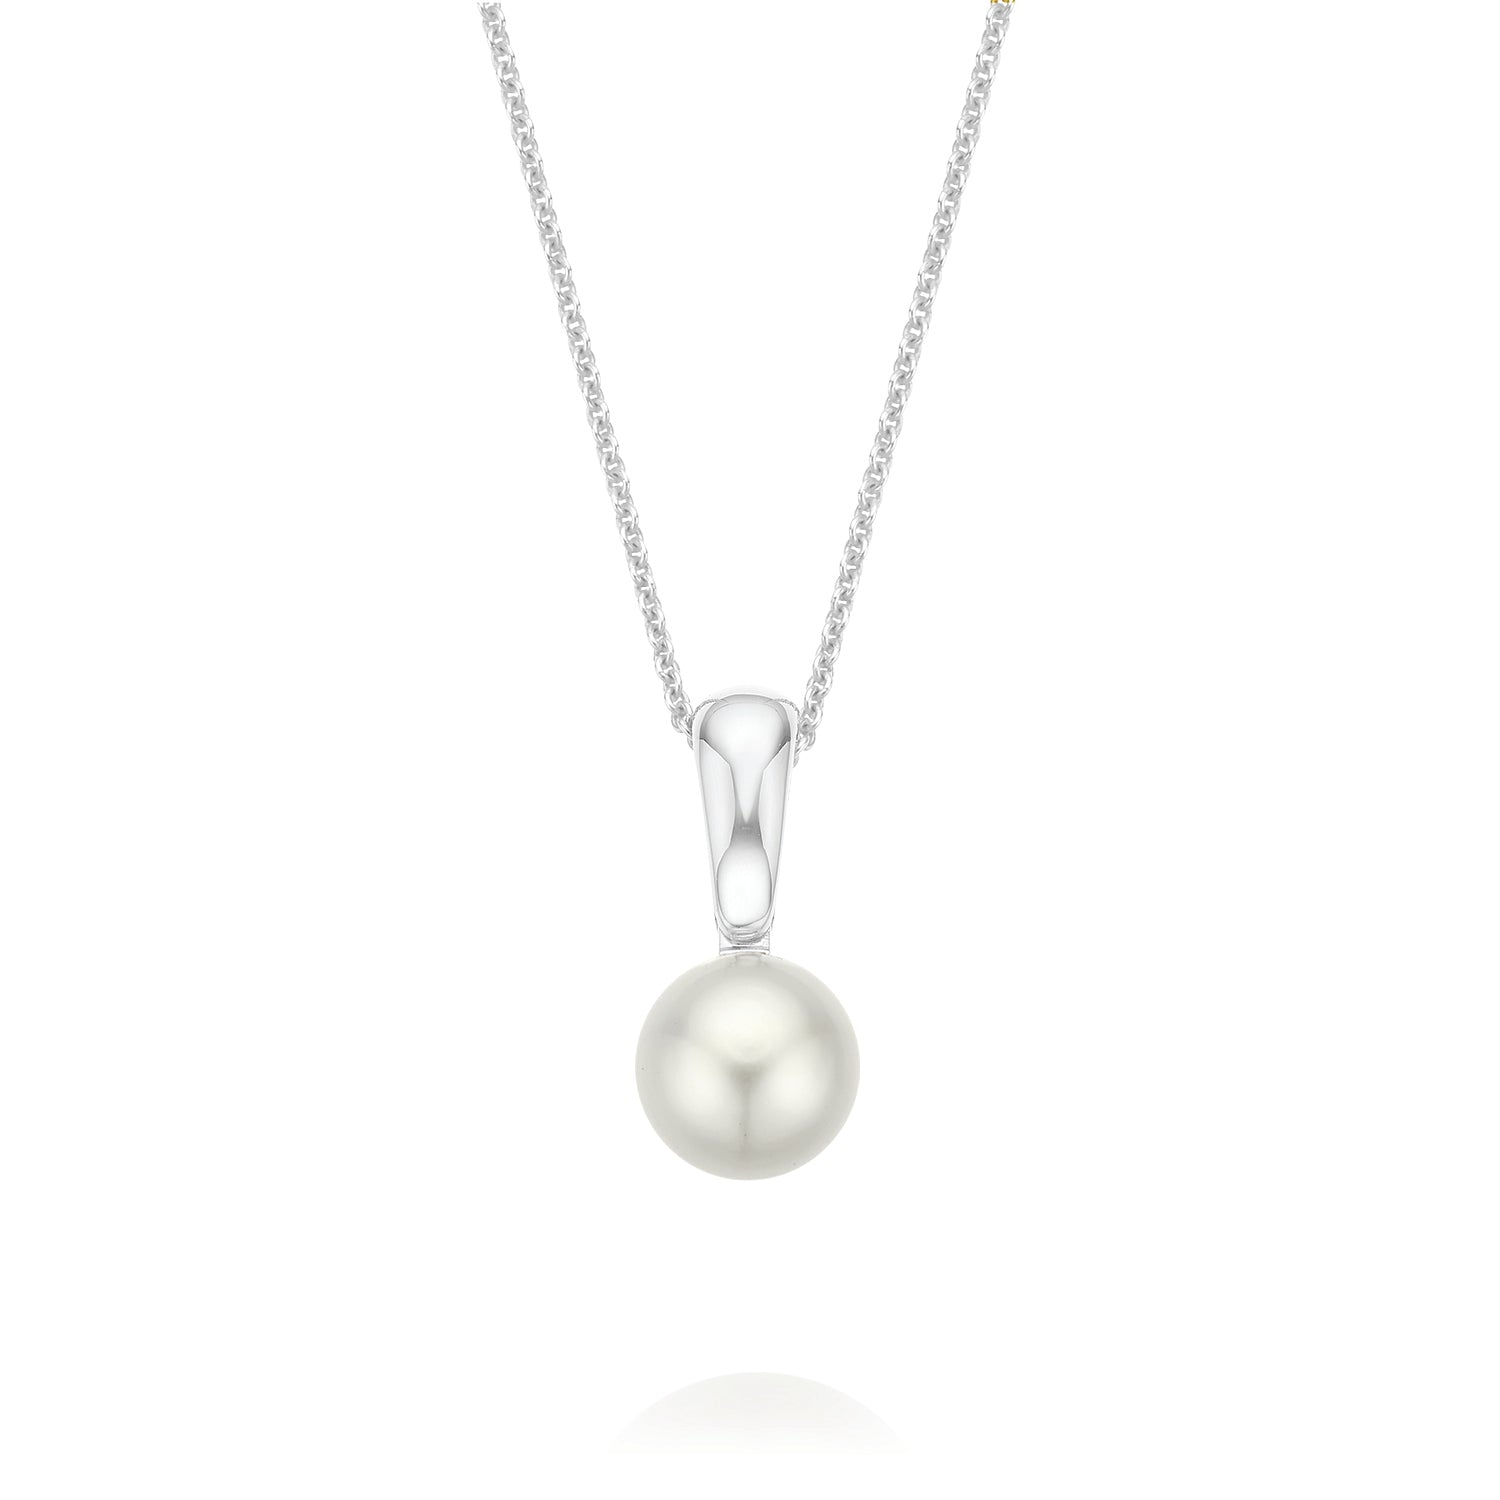 18ct White Gold 9mm South Sea Pearls Pendant